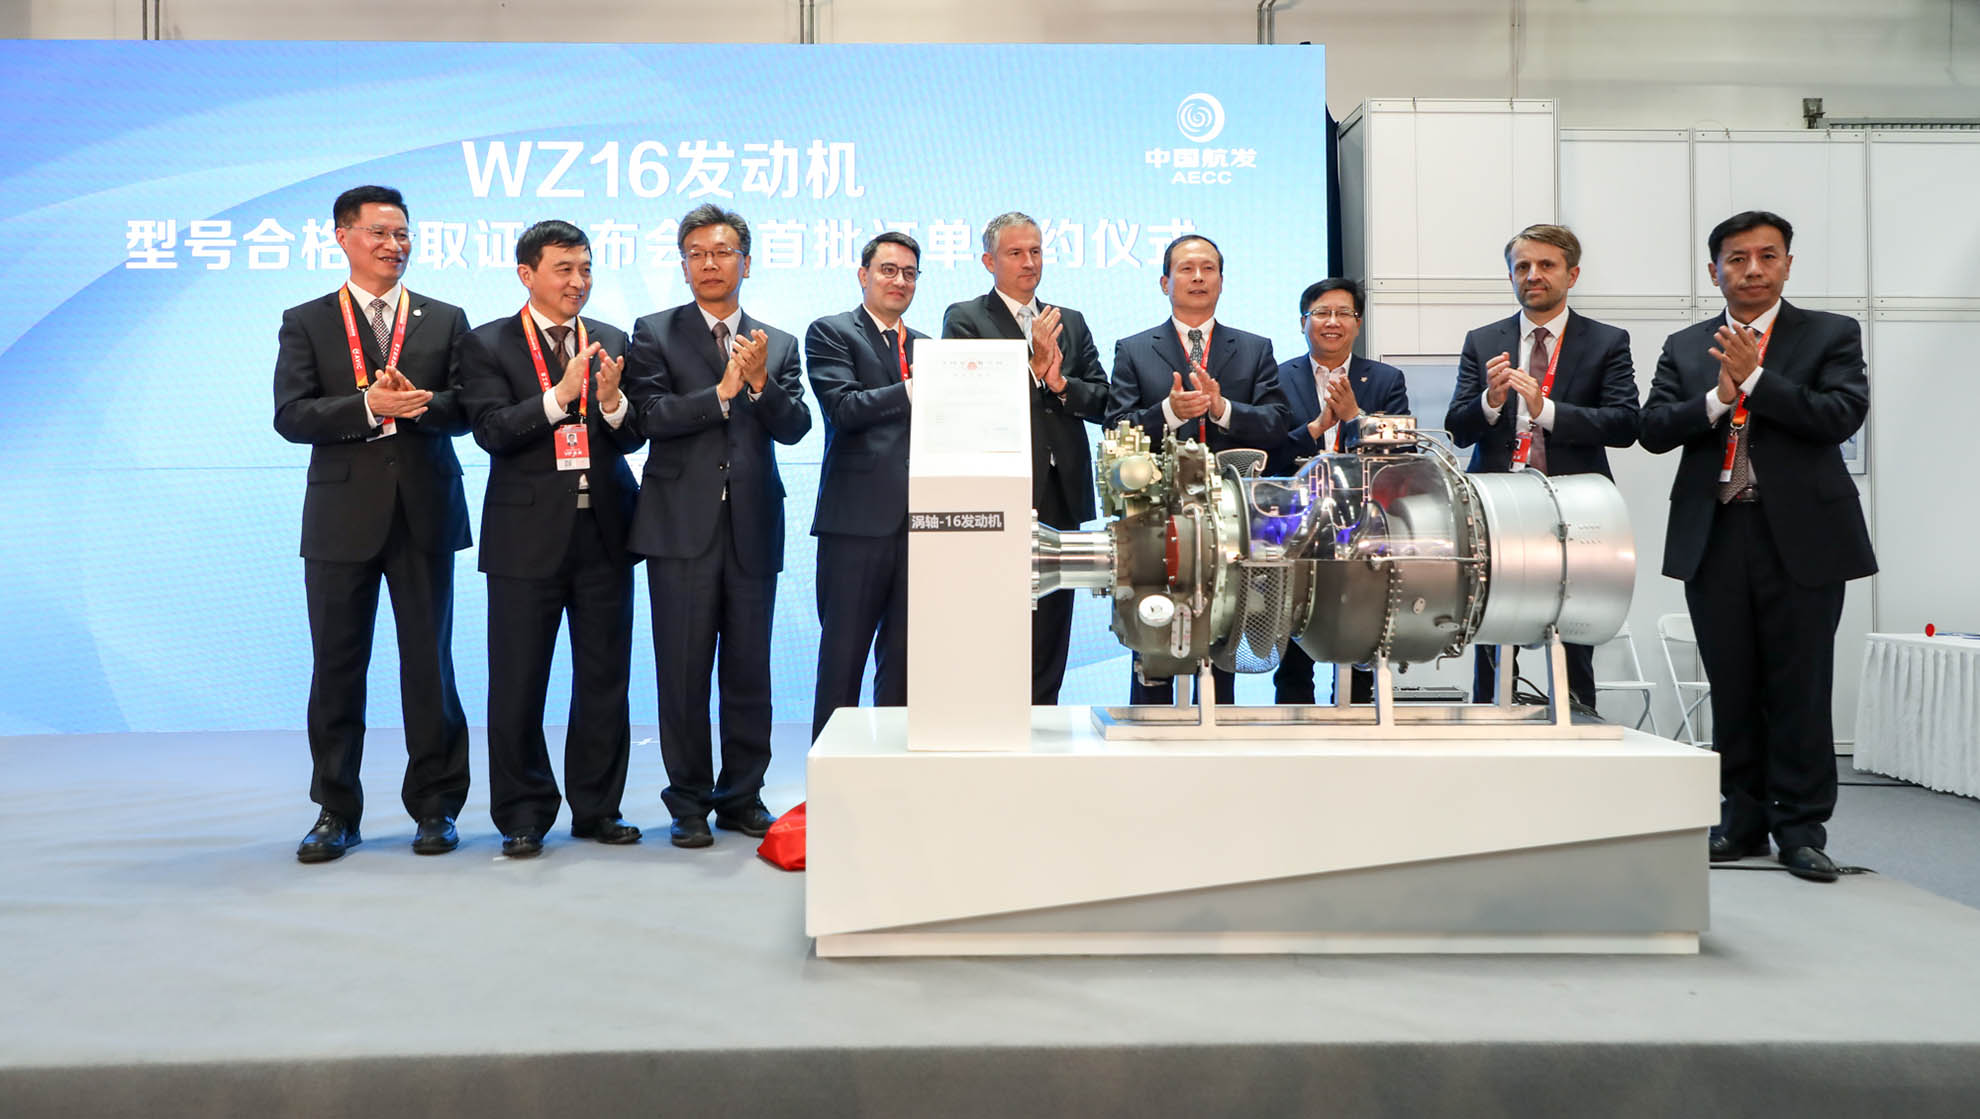 WEB-Safran-and-AECC-introduce-the-WZ16-the-first-jointly-developed-aero-engine-to-be-certified-in-China-%C2%A9Safran.jpg